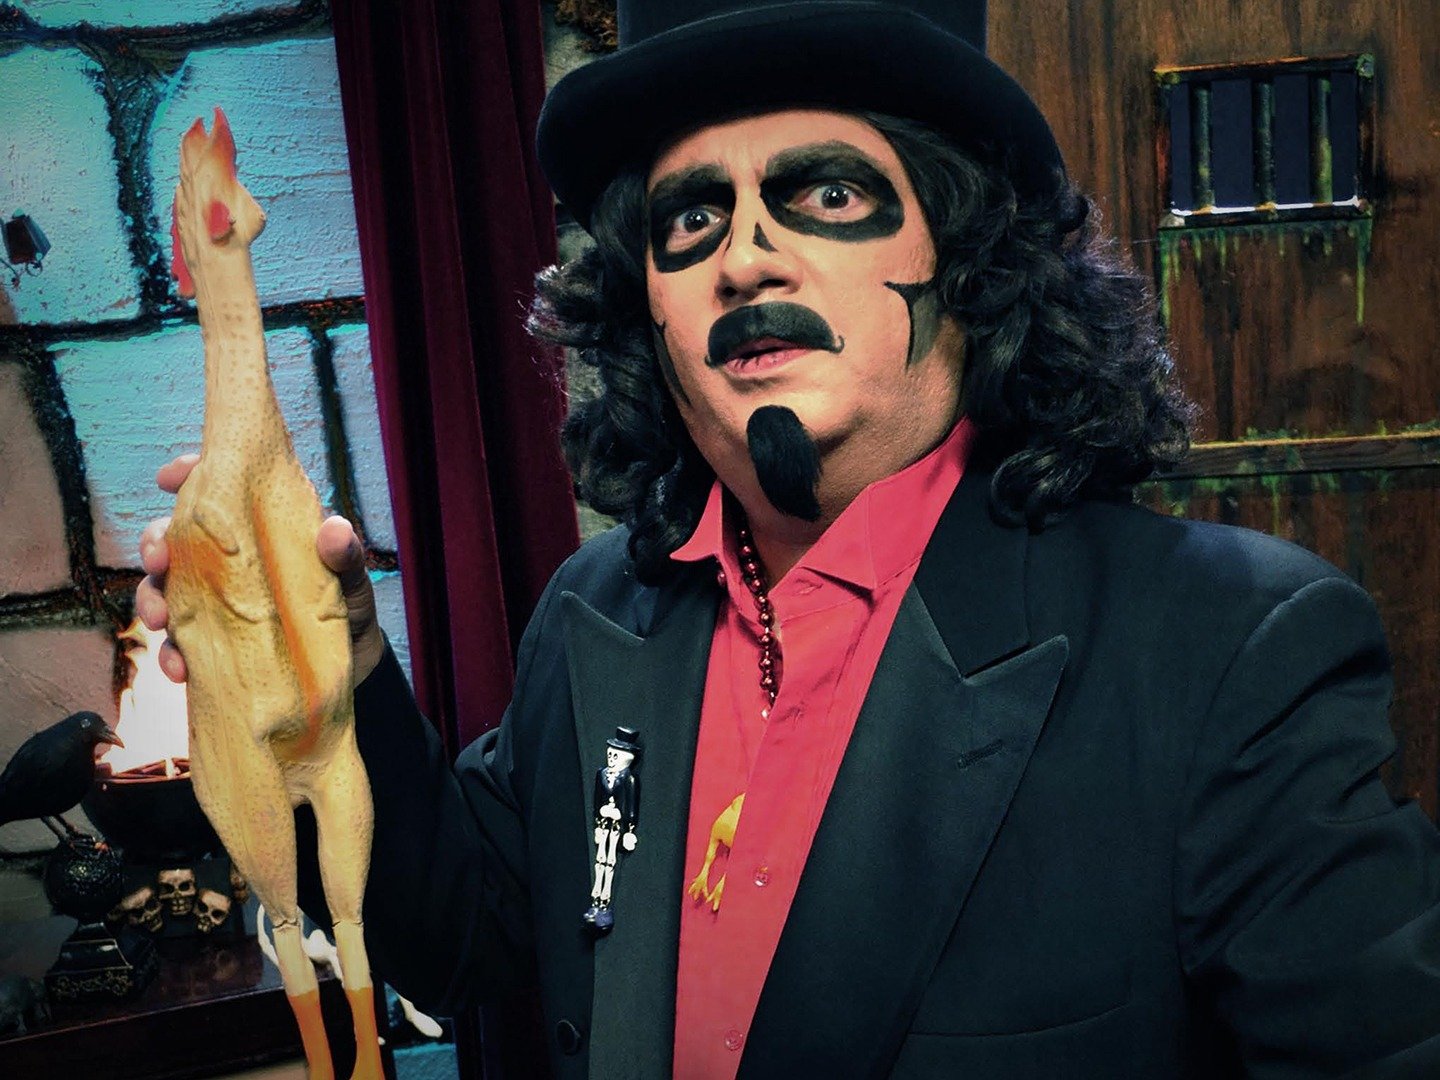 Svengoolie on TV Episode 8 Channels and schedules